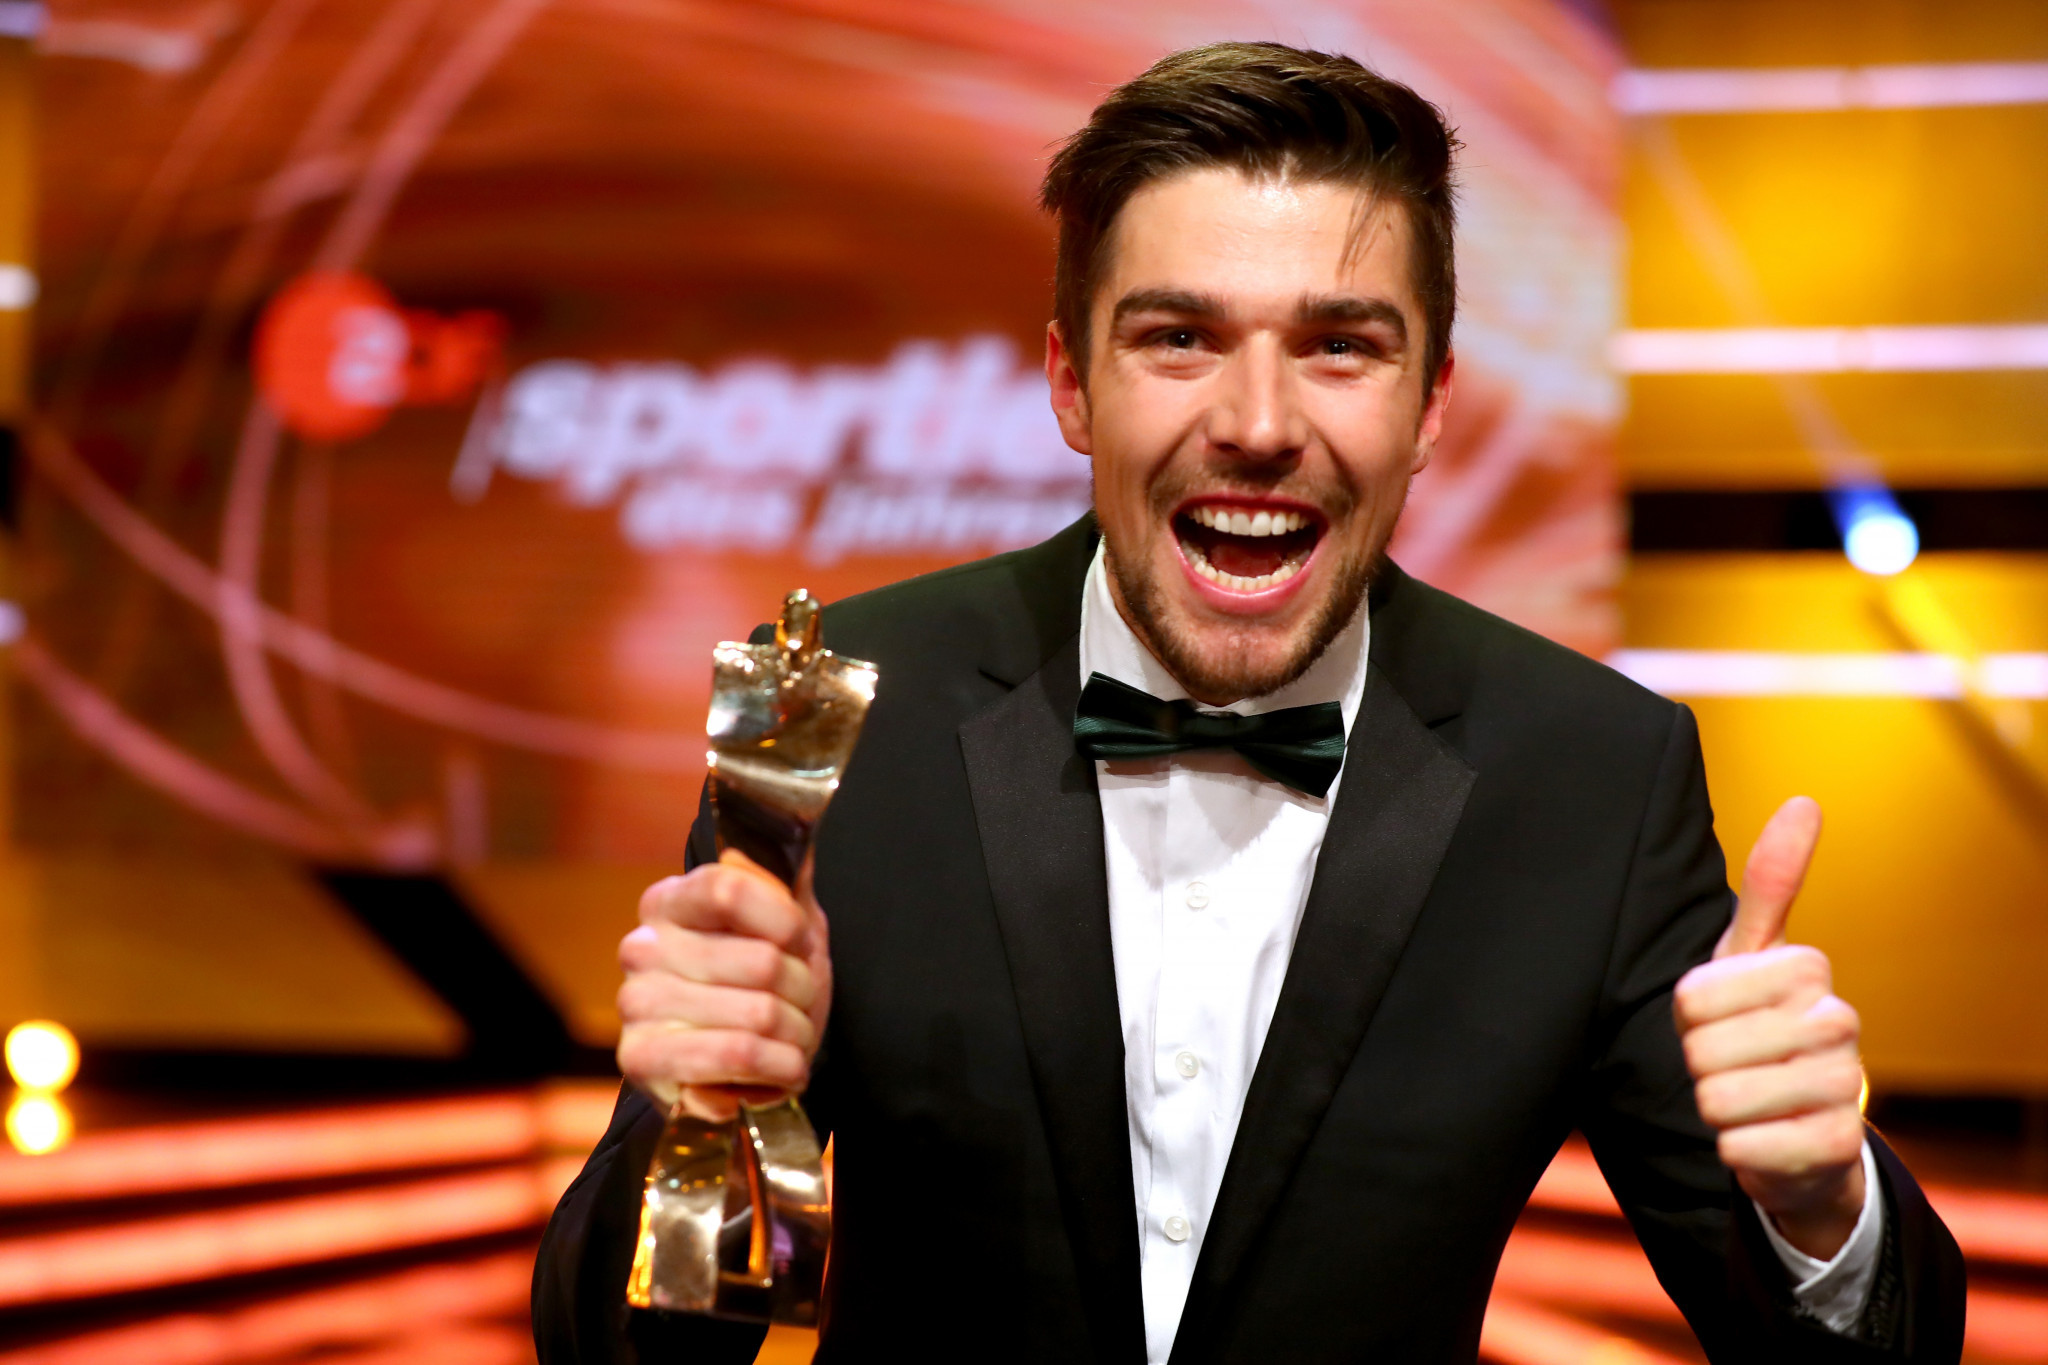 Rydzek named male athlete of the year by German media